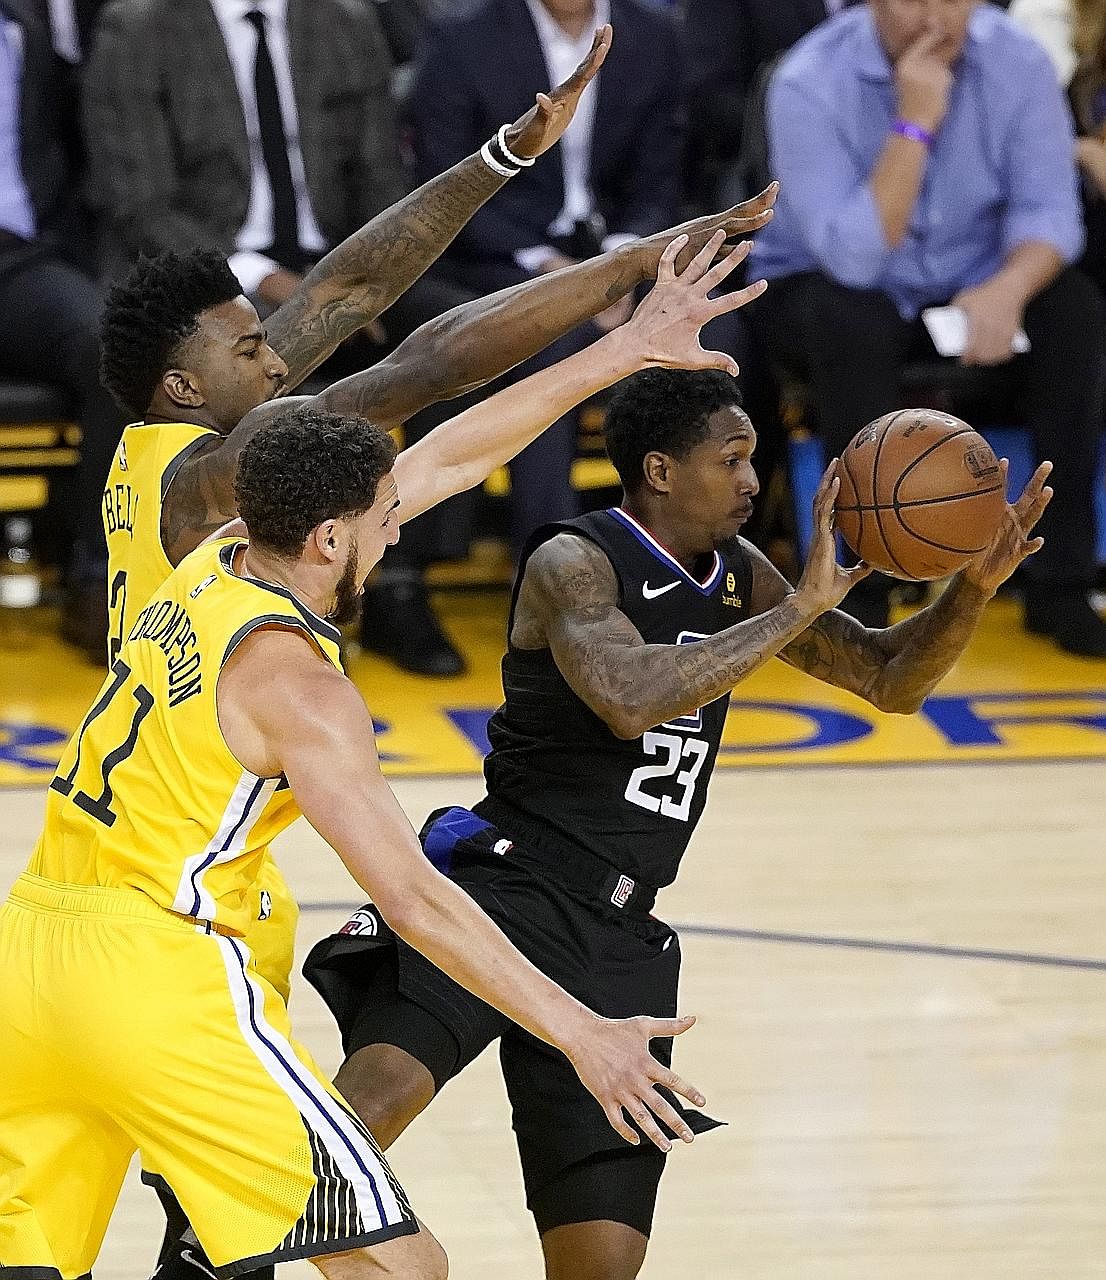 Clippers guard Lou Williams making a pass as Warriors guard Klay Thompson (centre) and forward Jordan Bell defend in Sunday's Game 2 of the NBA Western Conference first-round play-offs in Oakland. The visitors scored 85 points in the second half to b